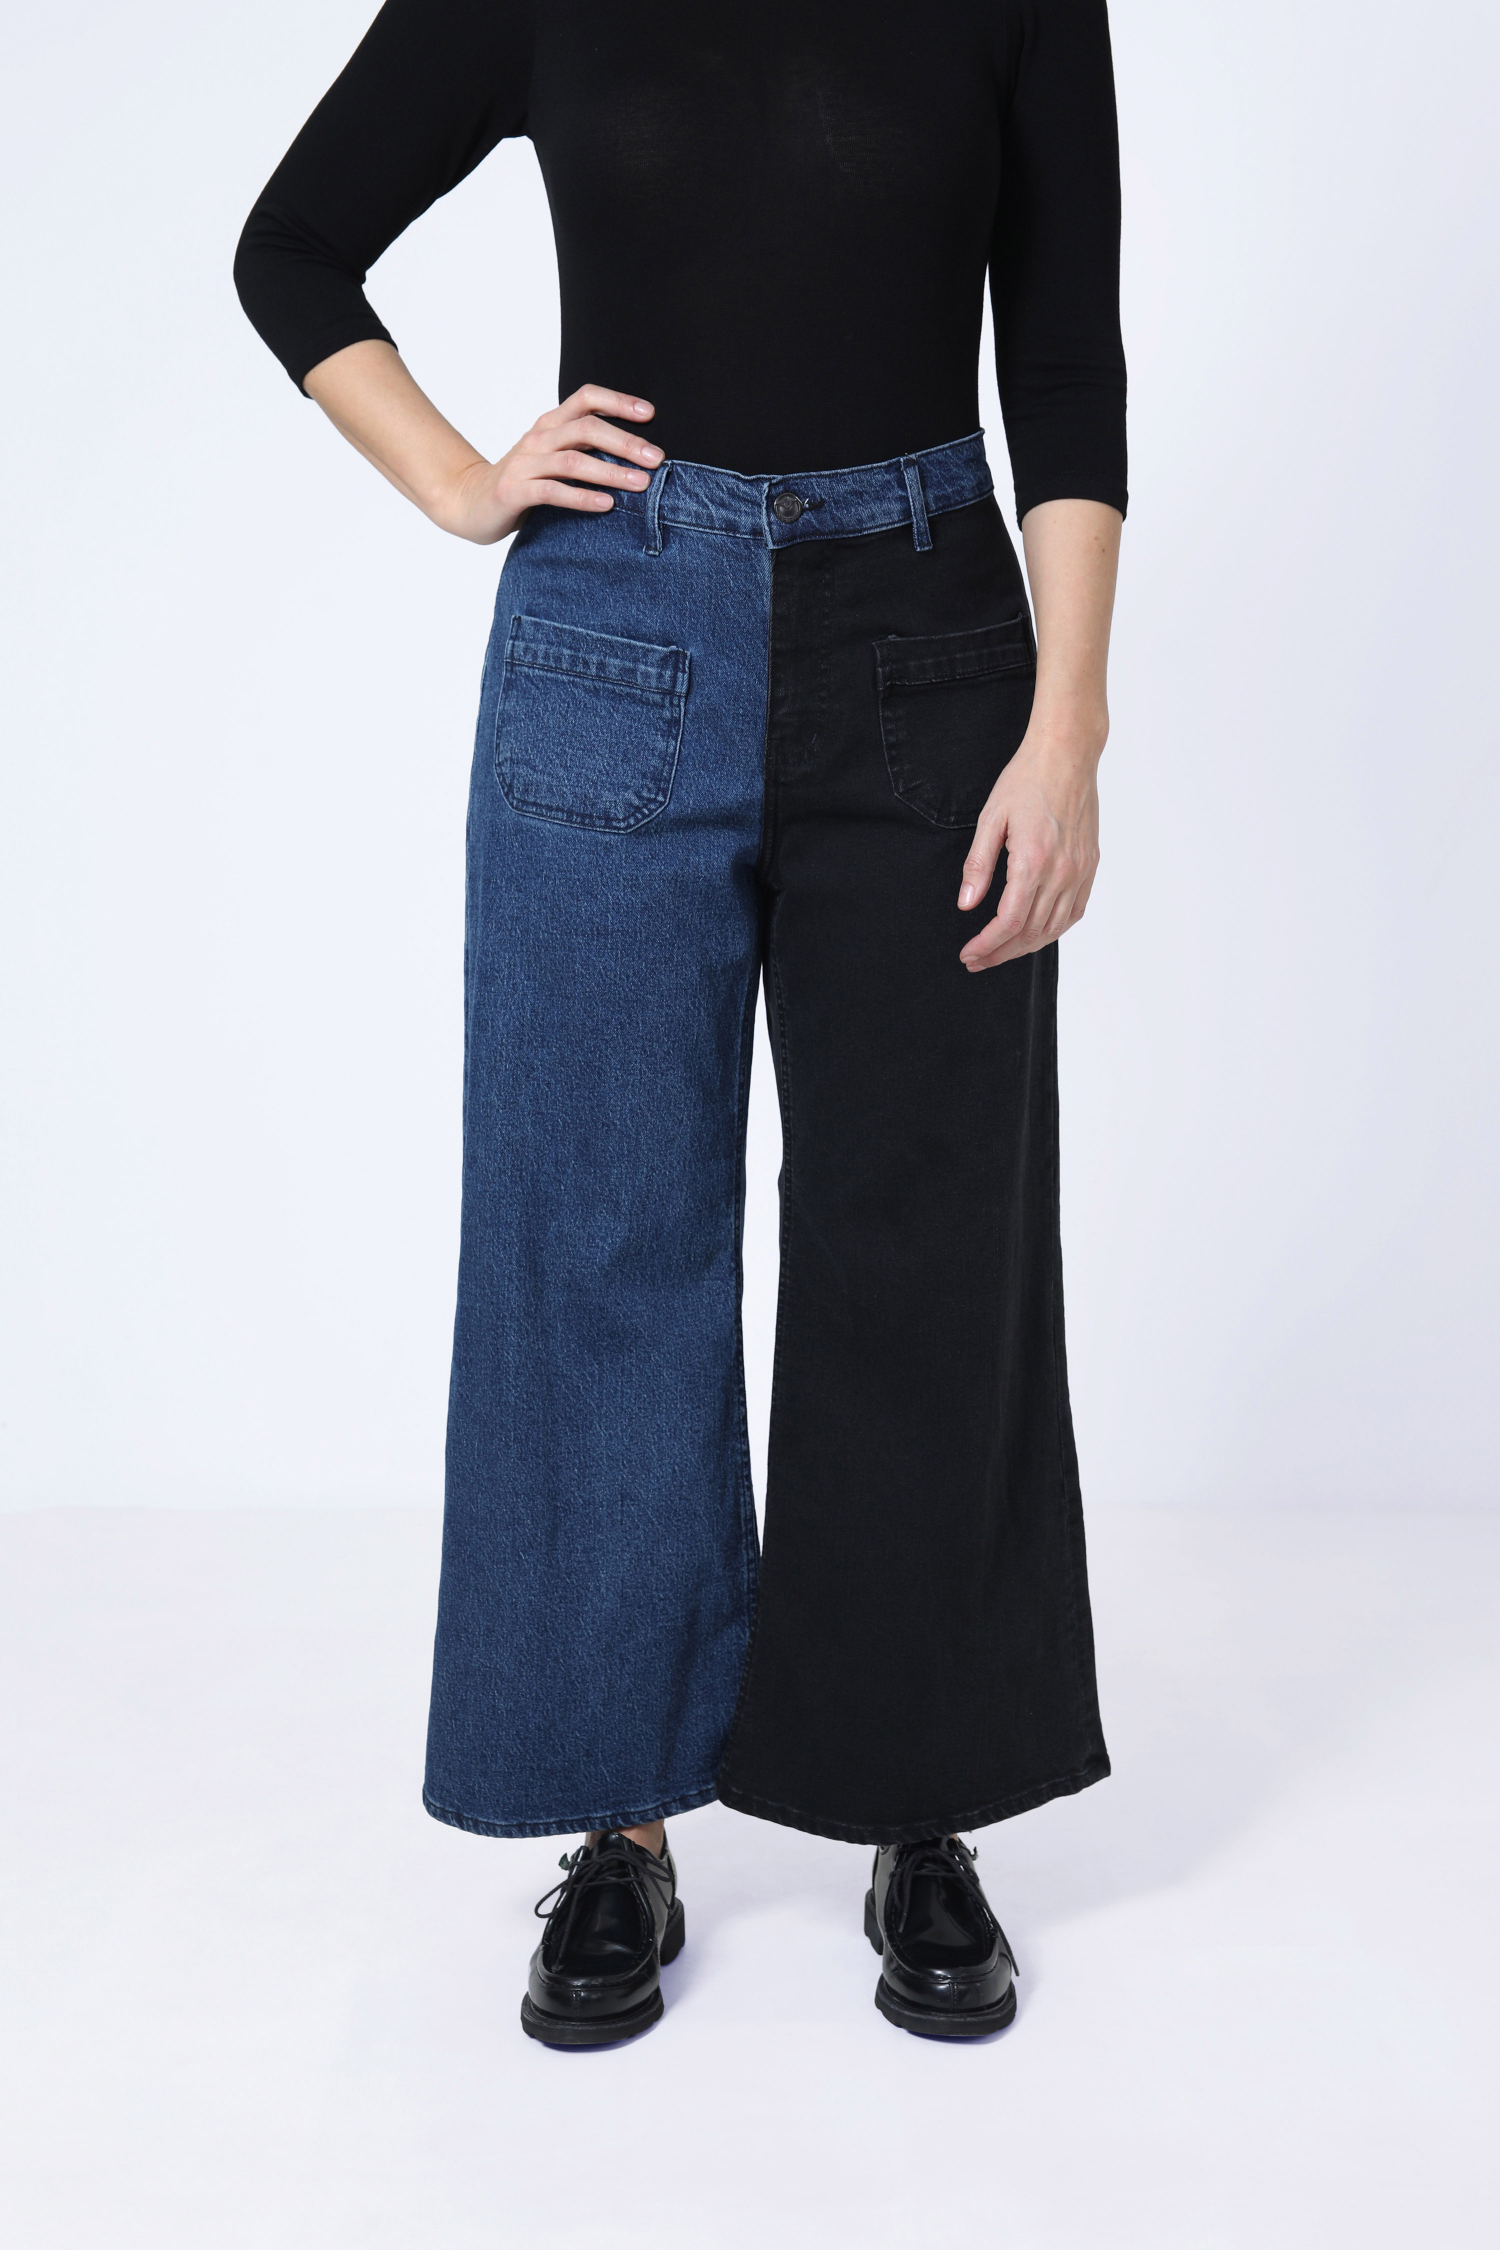 two-tone flared style jeans